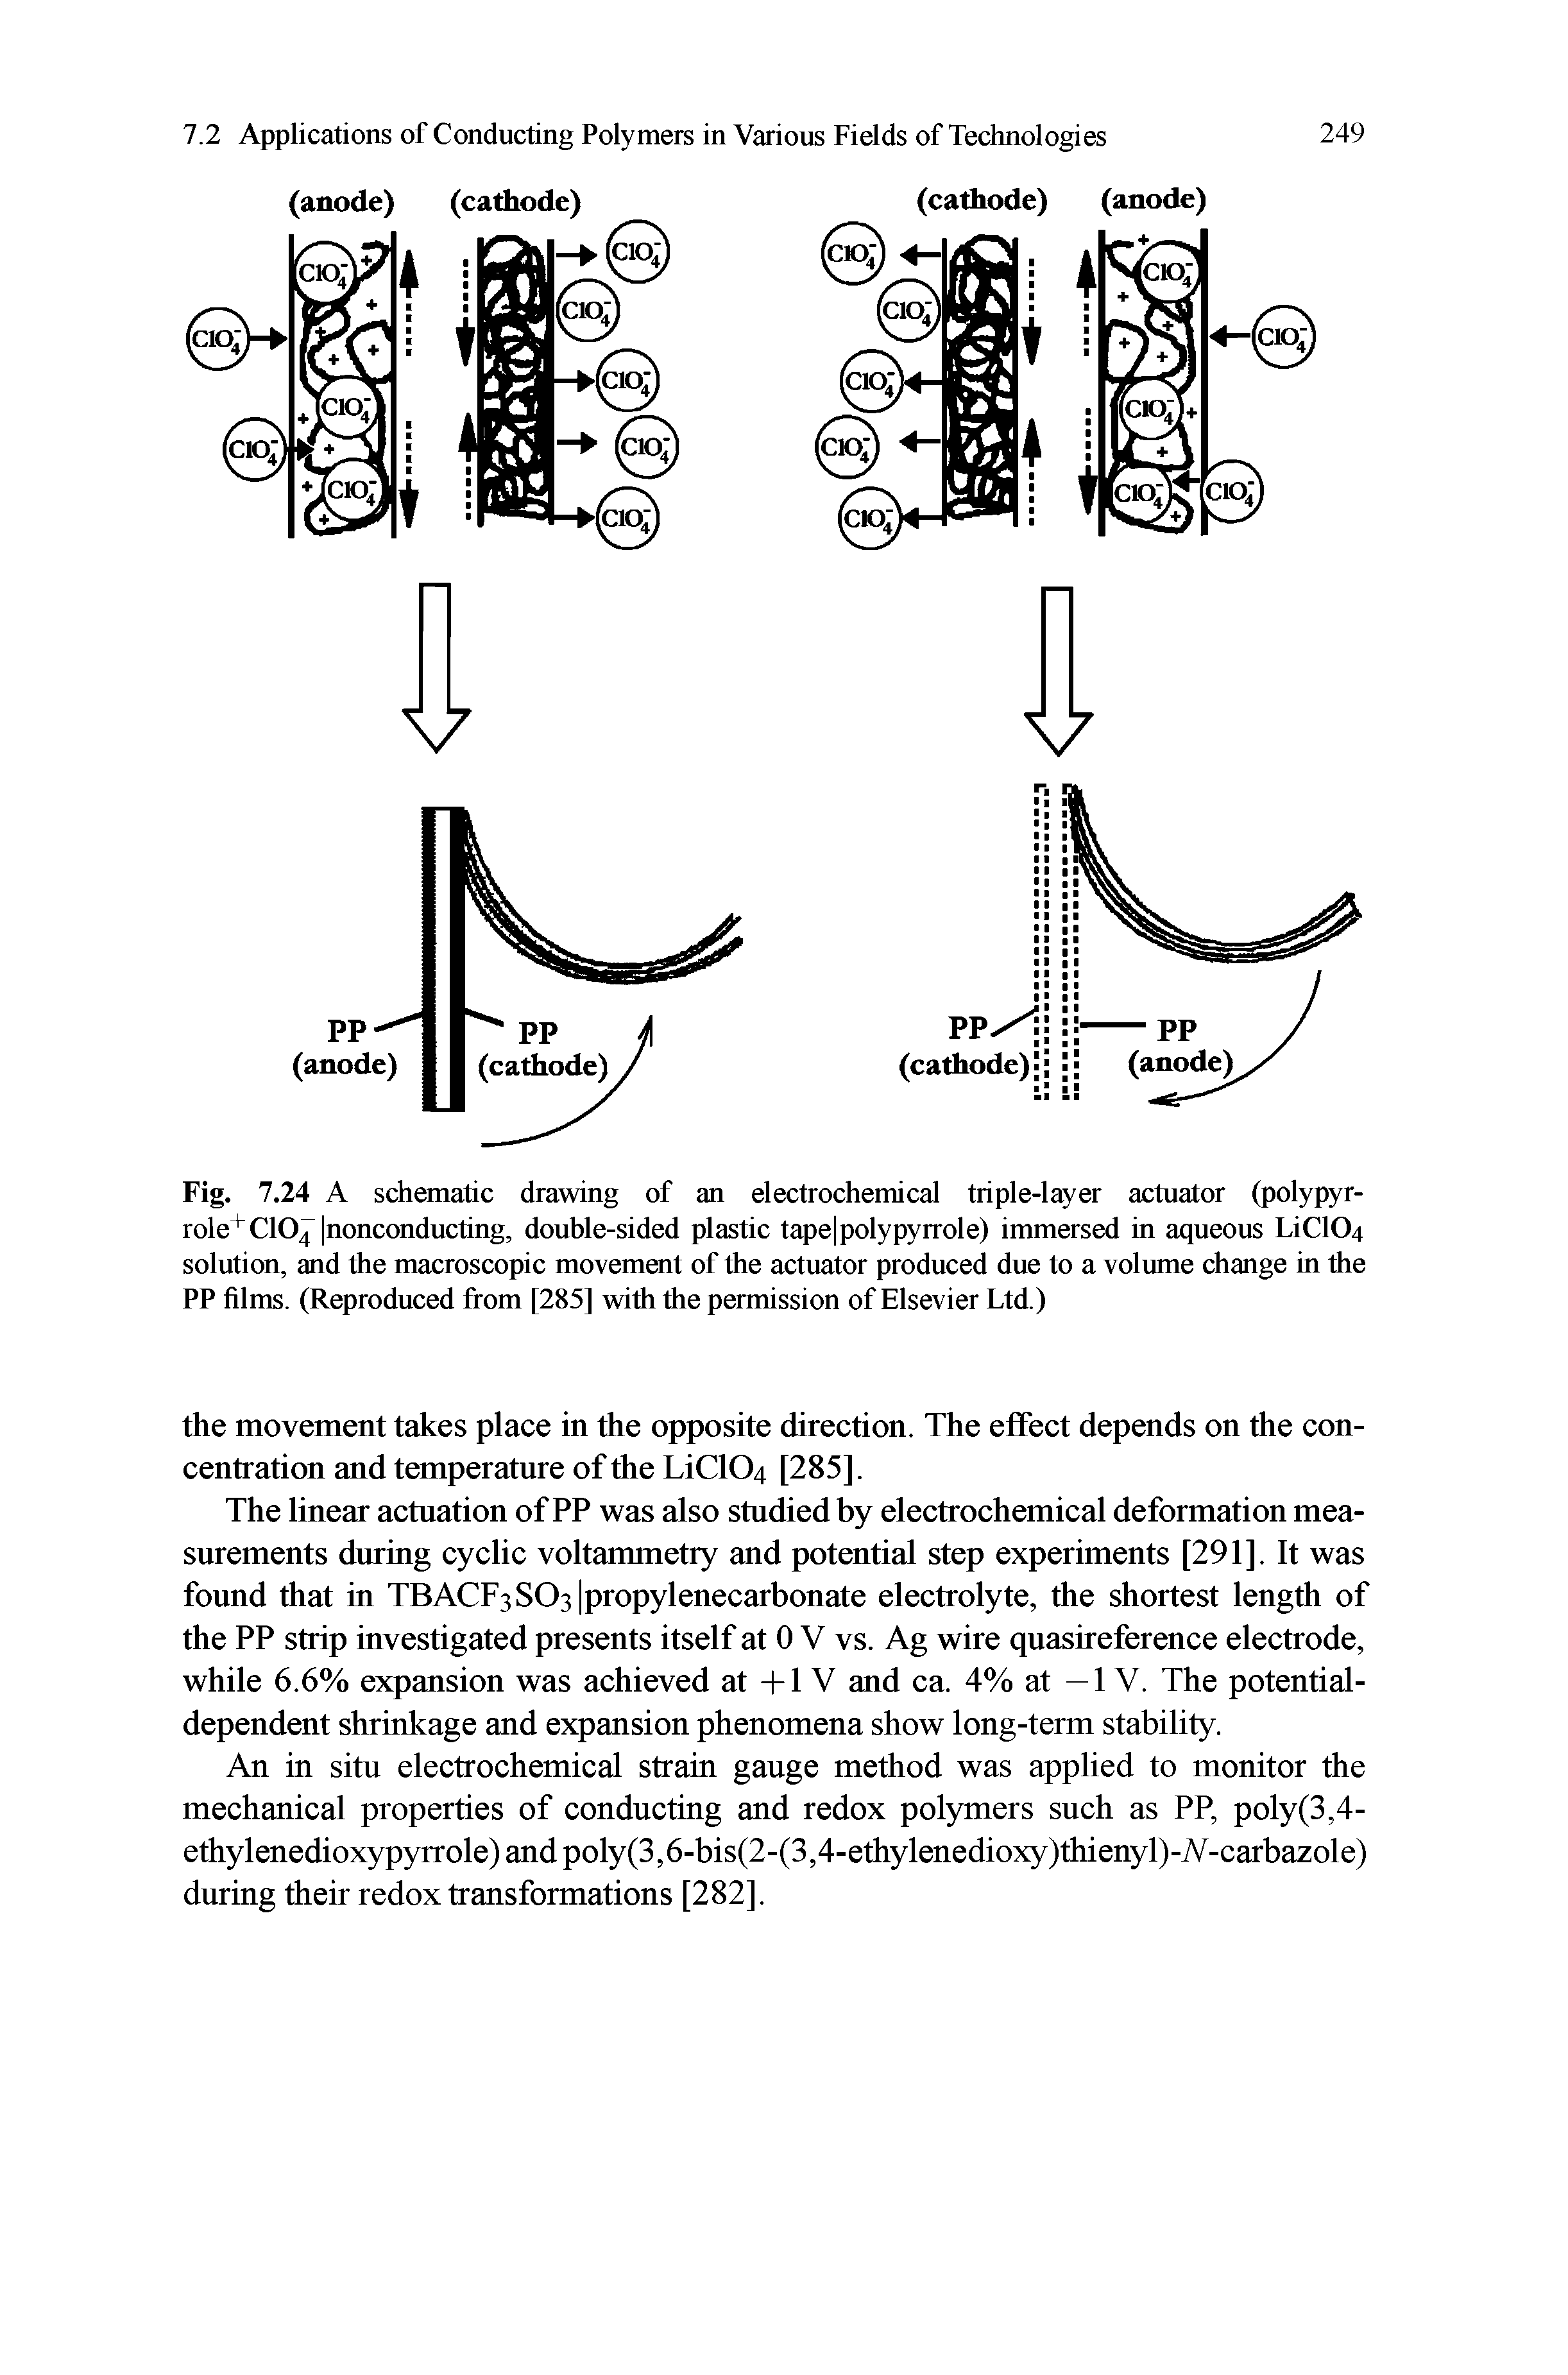 Fig. 7.24 A schematic drawing of an electrochemical triple-layer actuator (polypyr-role C104 nonconducting, double-sided plastic tape polypyrrole) immersed in aqueous LiC104 solution, and the macroscopic movement of the actuator produced due to a volume change in the PP films. (Reproduced from [285] with the permission of Elsevier Ltd.)...